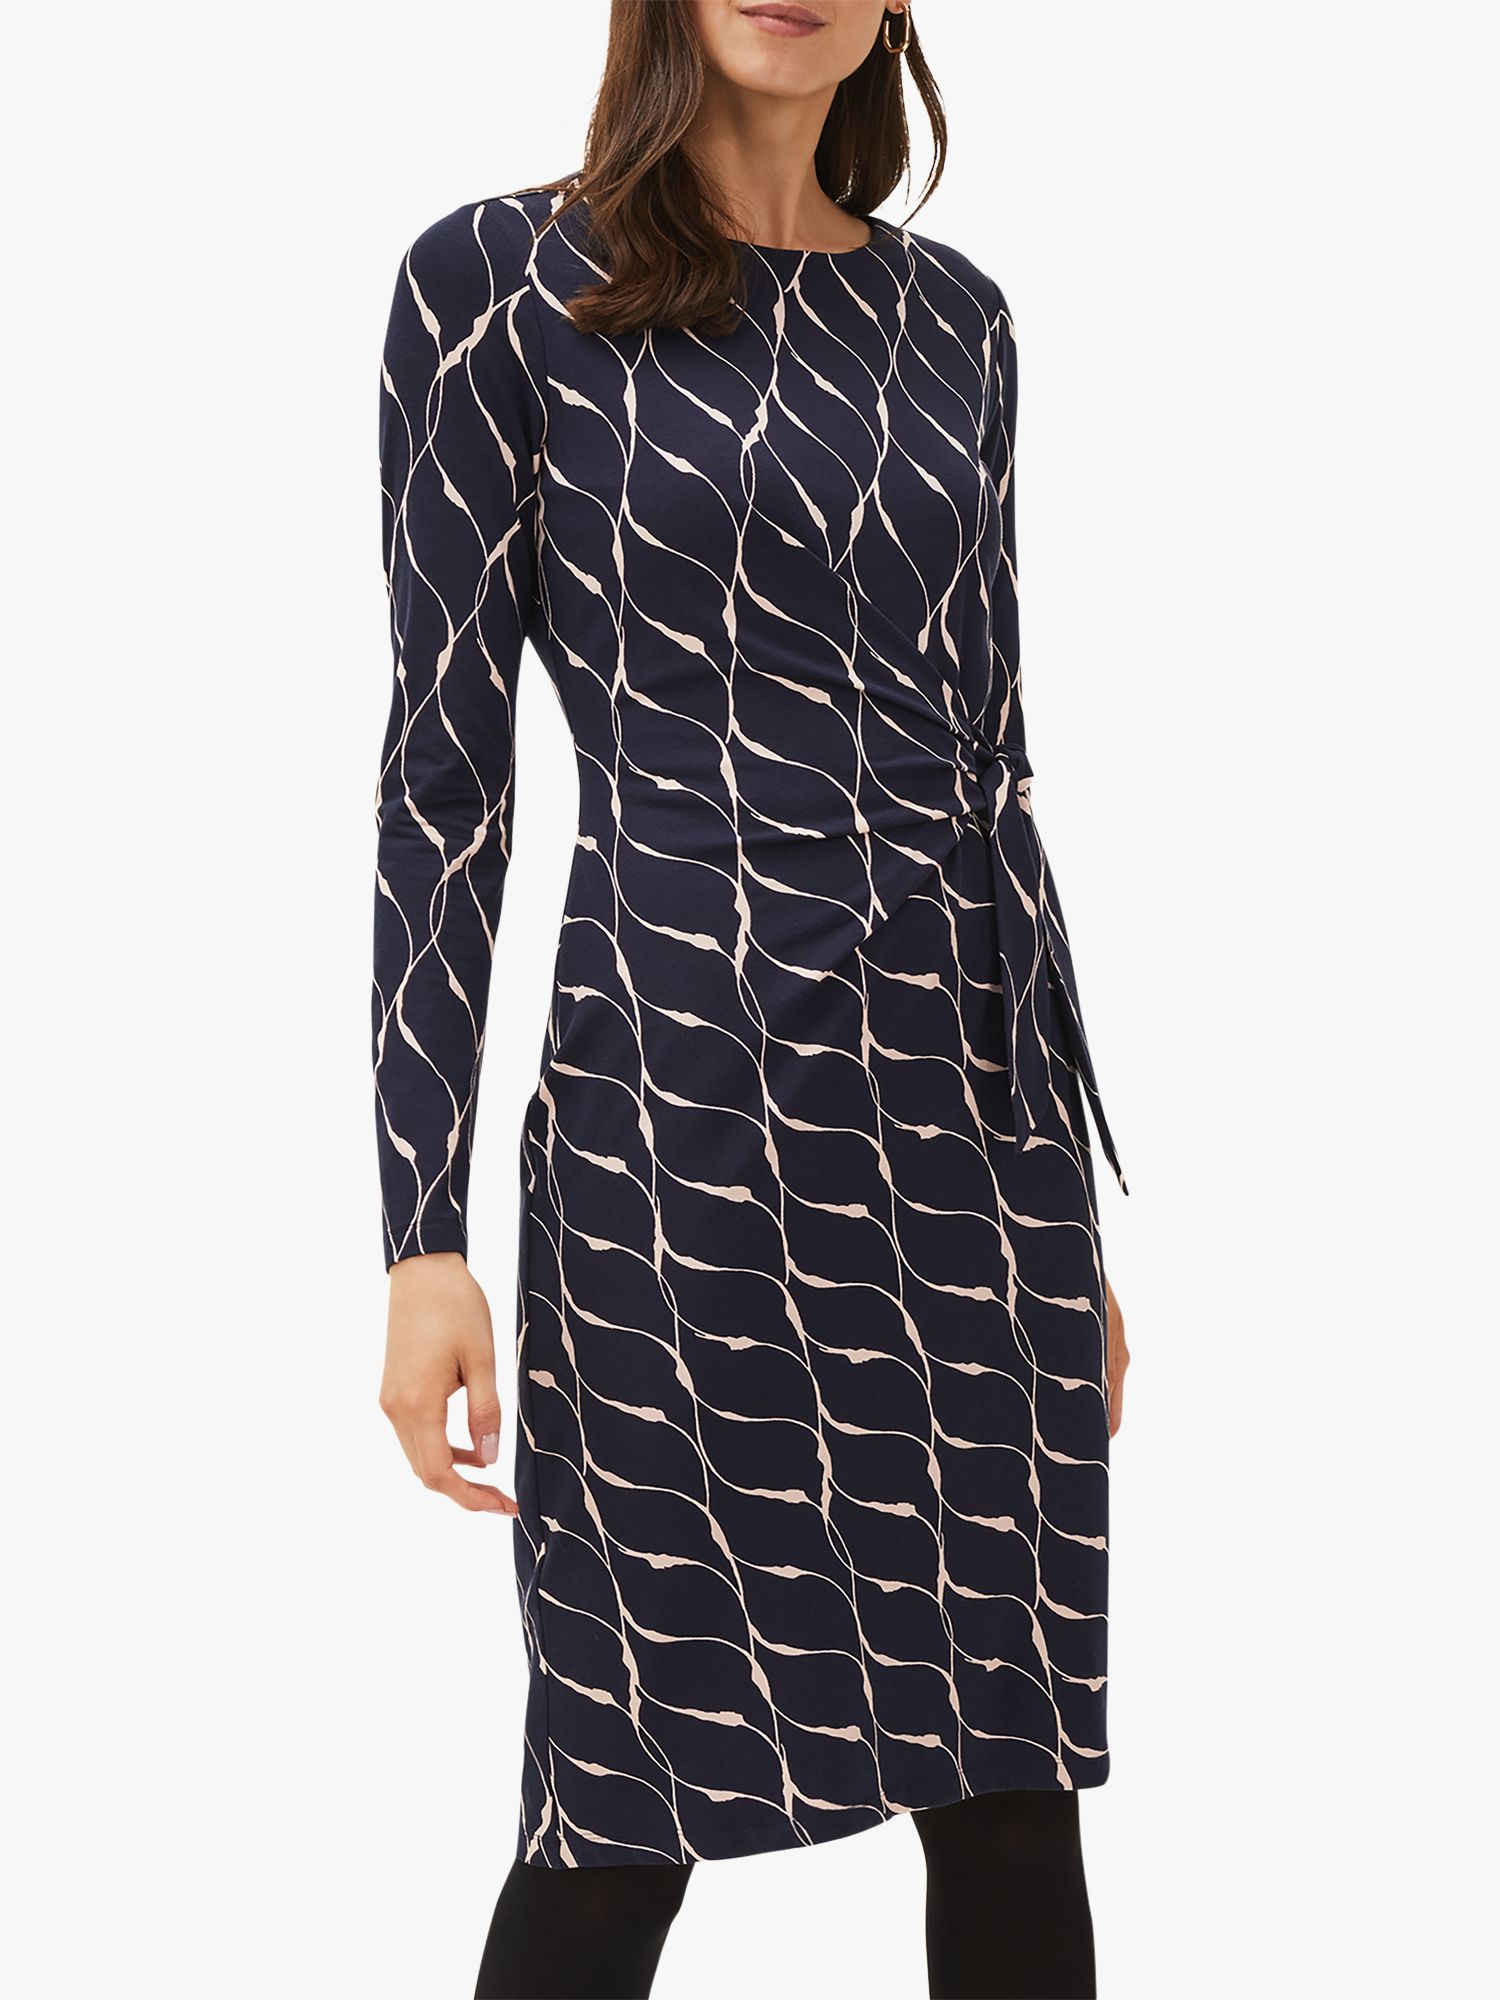 Phase Eight Ally Abstract Print Dress, Navy at John Lewis & Partners